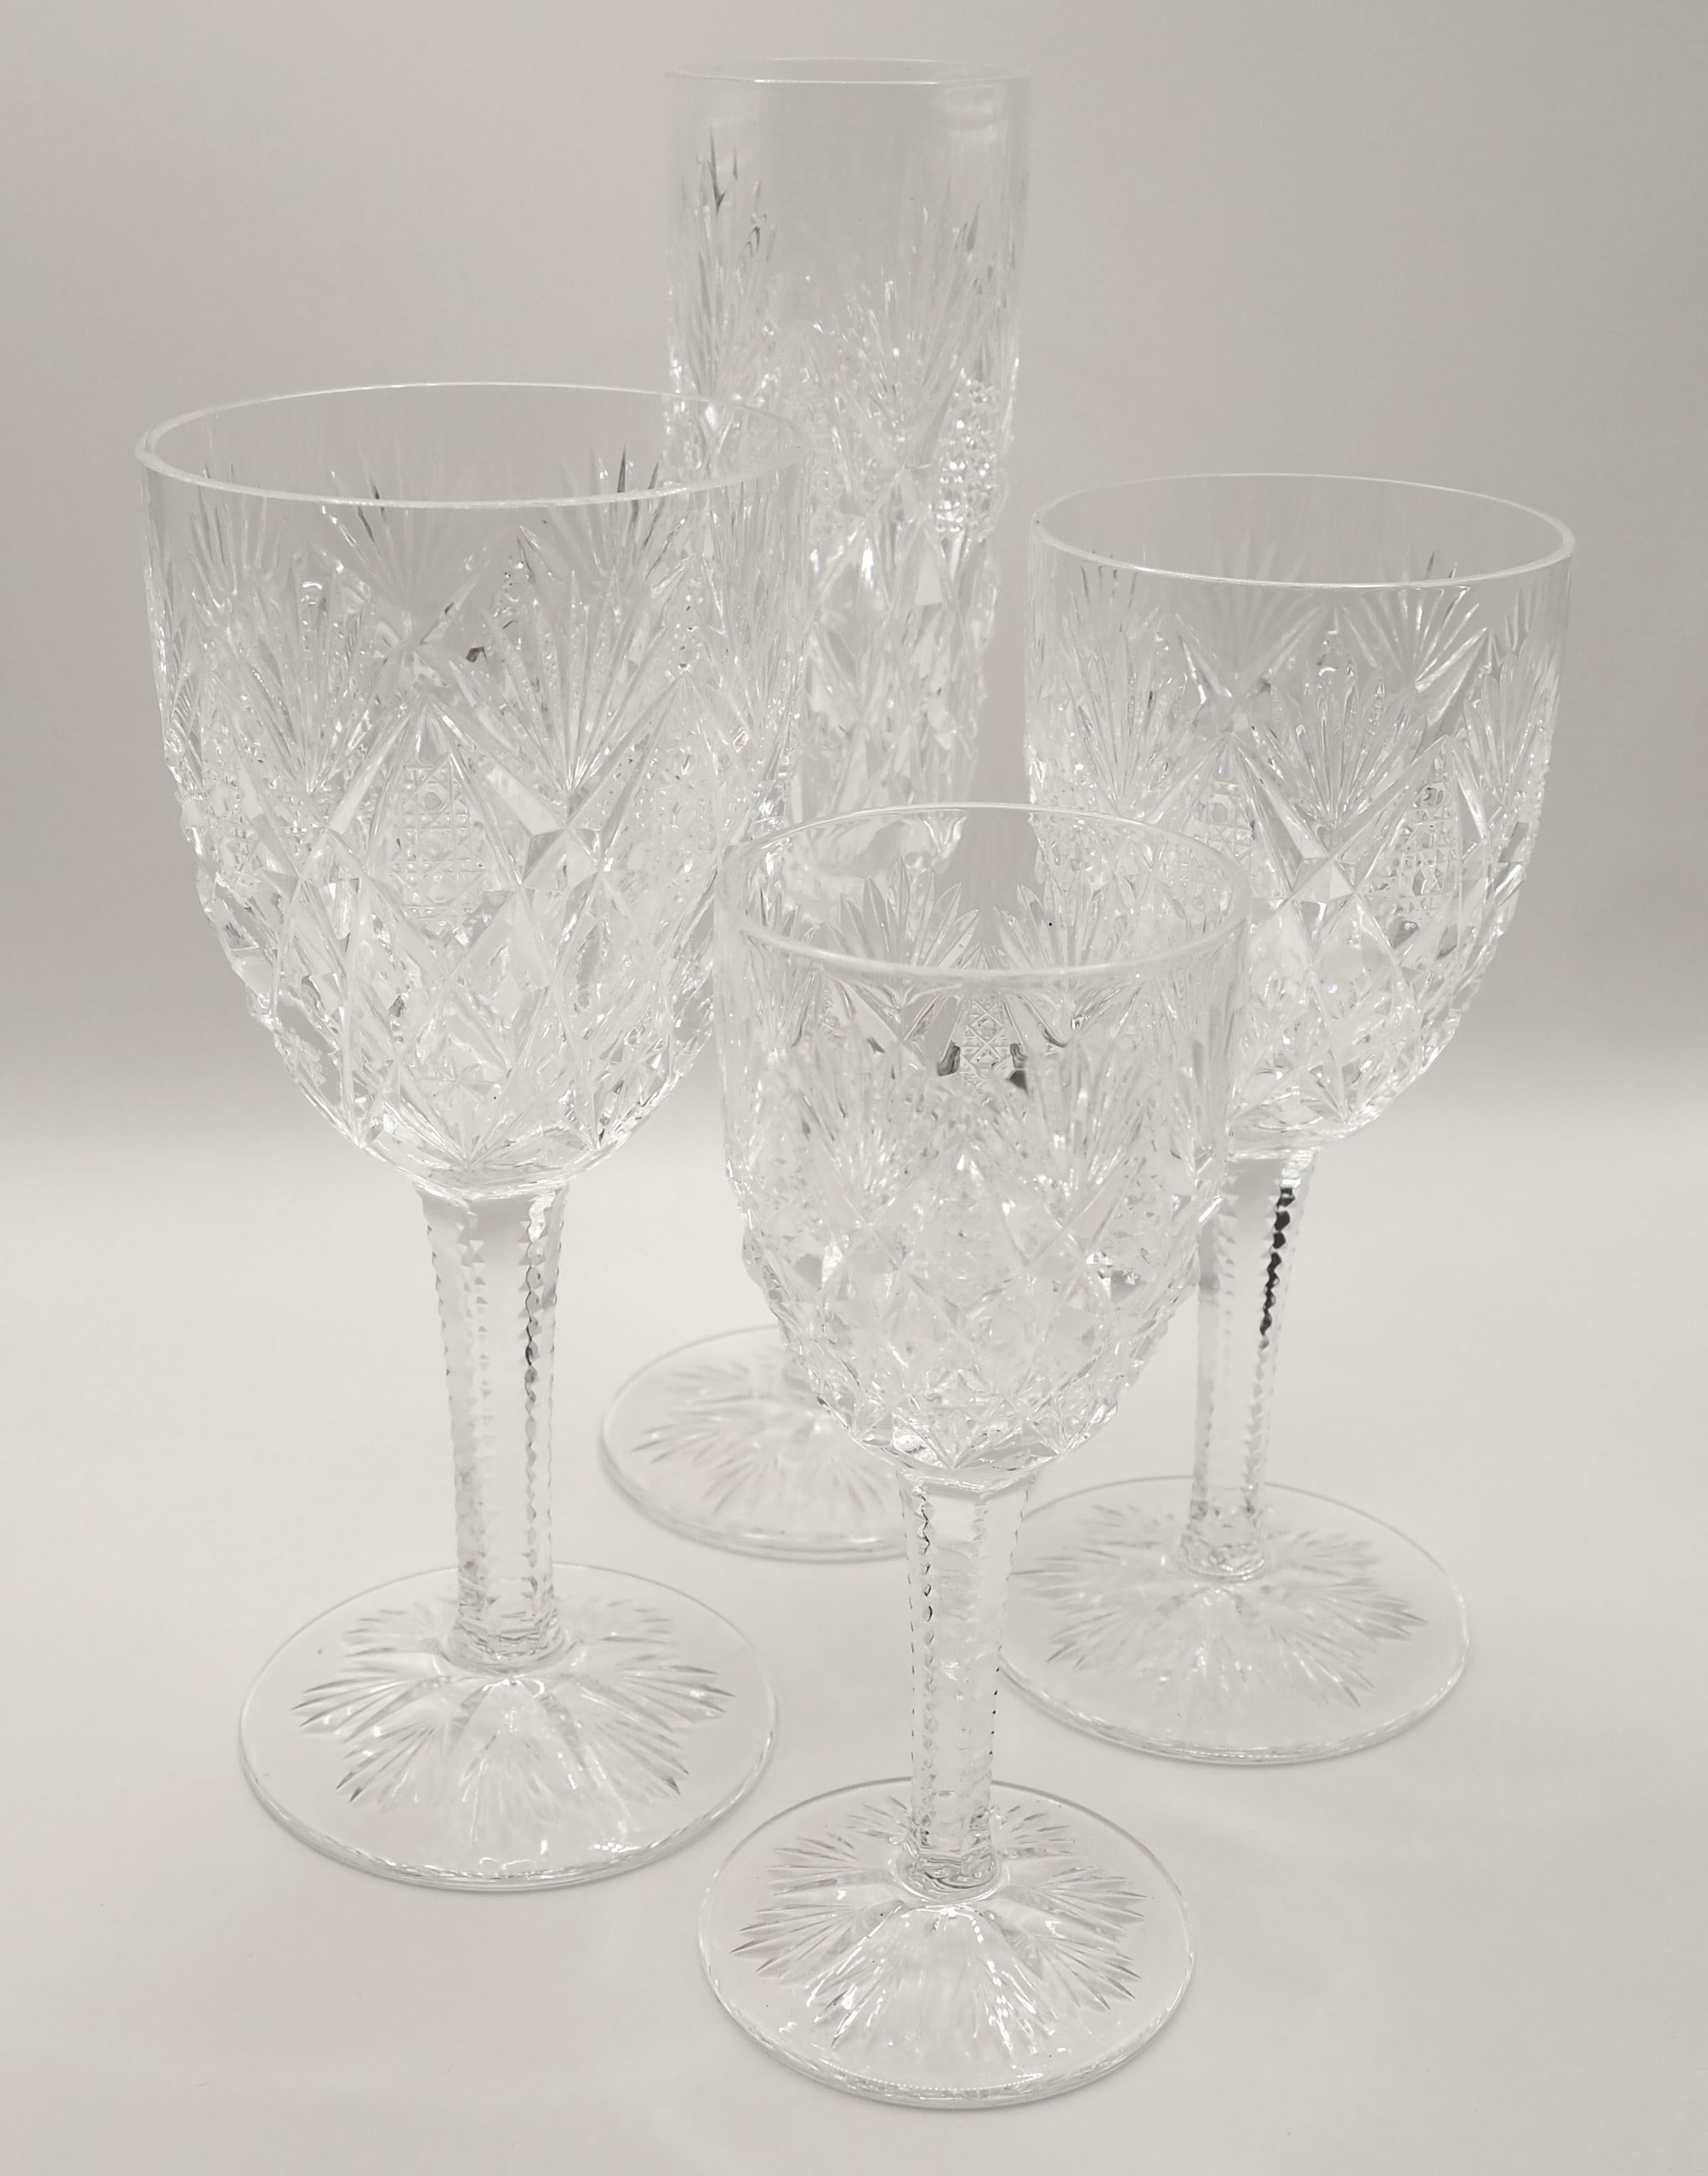 Large St Louis crystal set for 6 guests, 24 pieces beautiful Florence cut.

Florence cut is one of the most luxurious patterns St Louis ever designed. It is a witness of greatest French crystal makers savoir-faire and greatness. Light reflection is